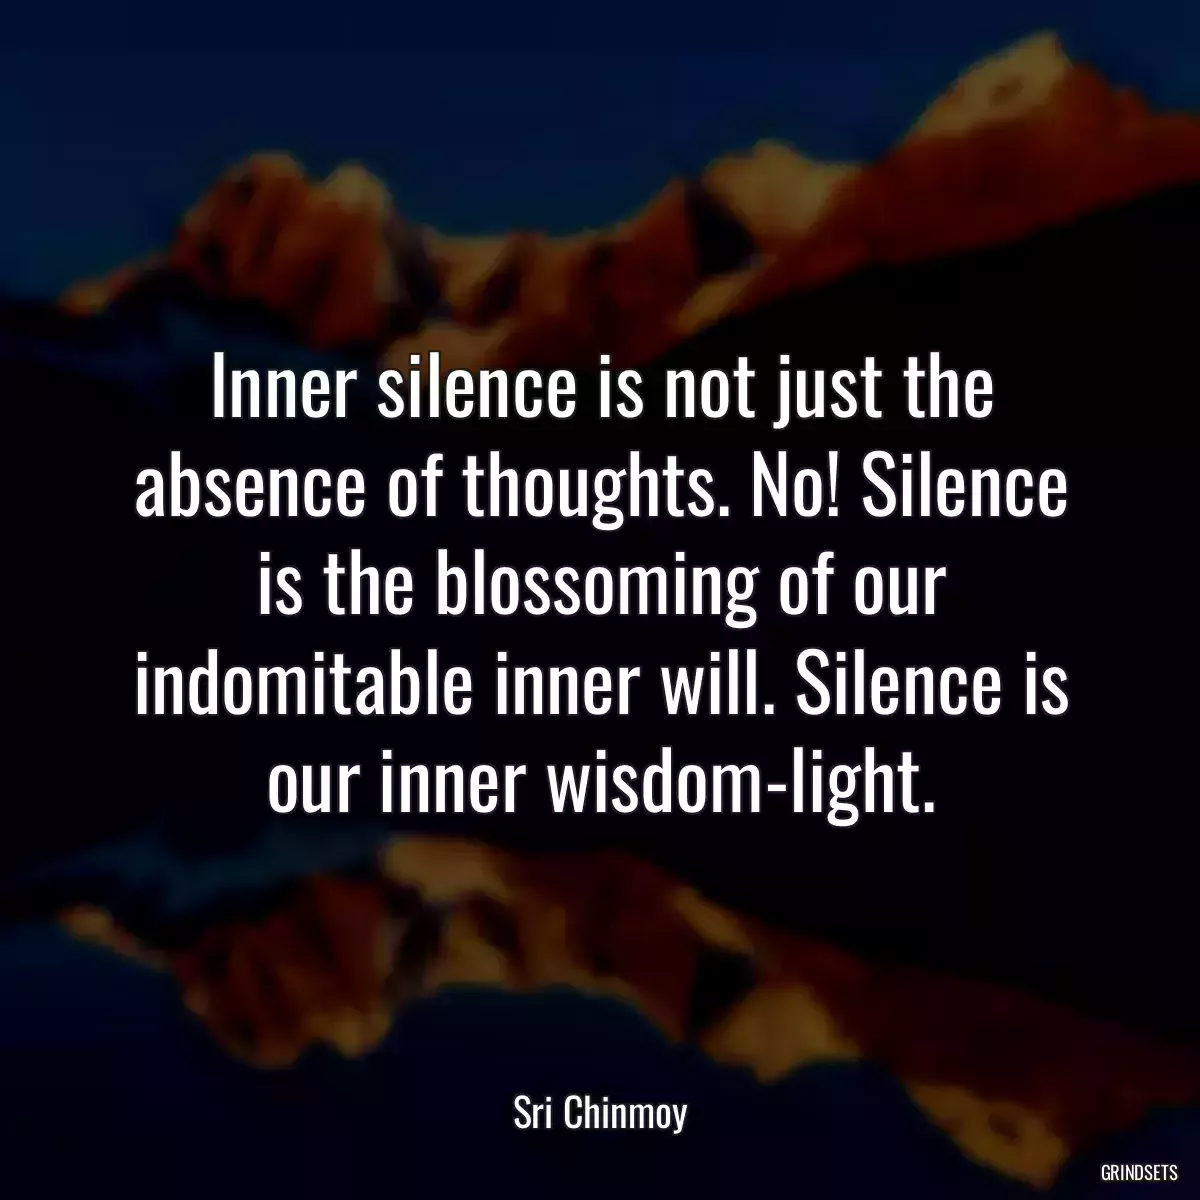 Inner silence is not just the absence of thoughts. No! Silence is the blossoming of our indomitable inner will. Silence is our inner wisdom-light.